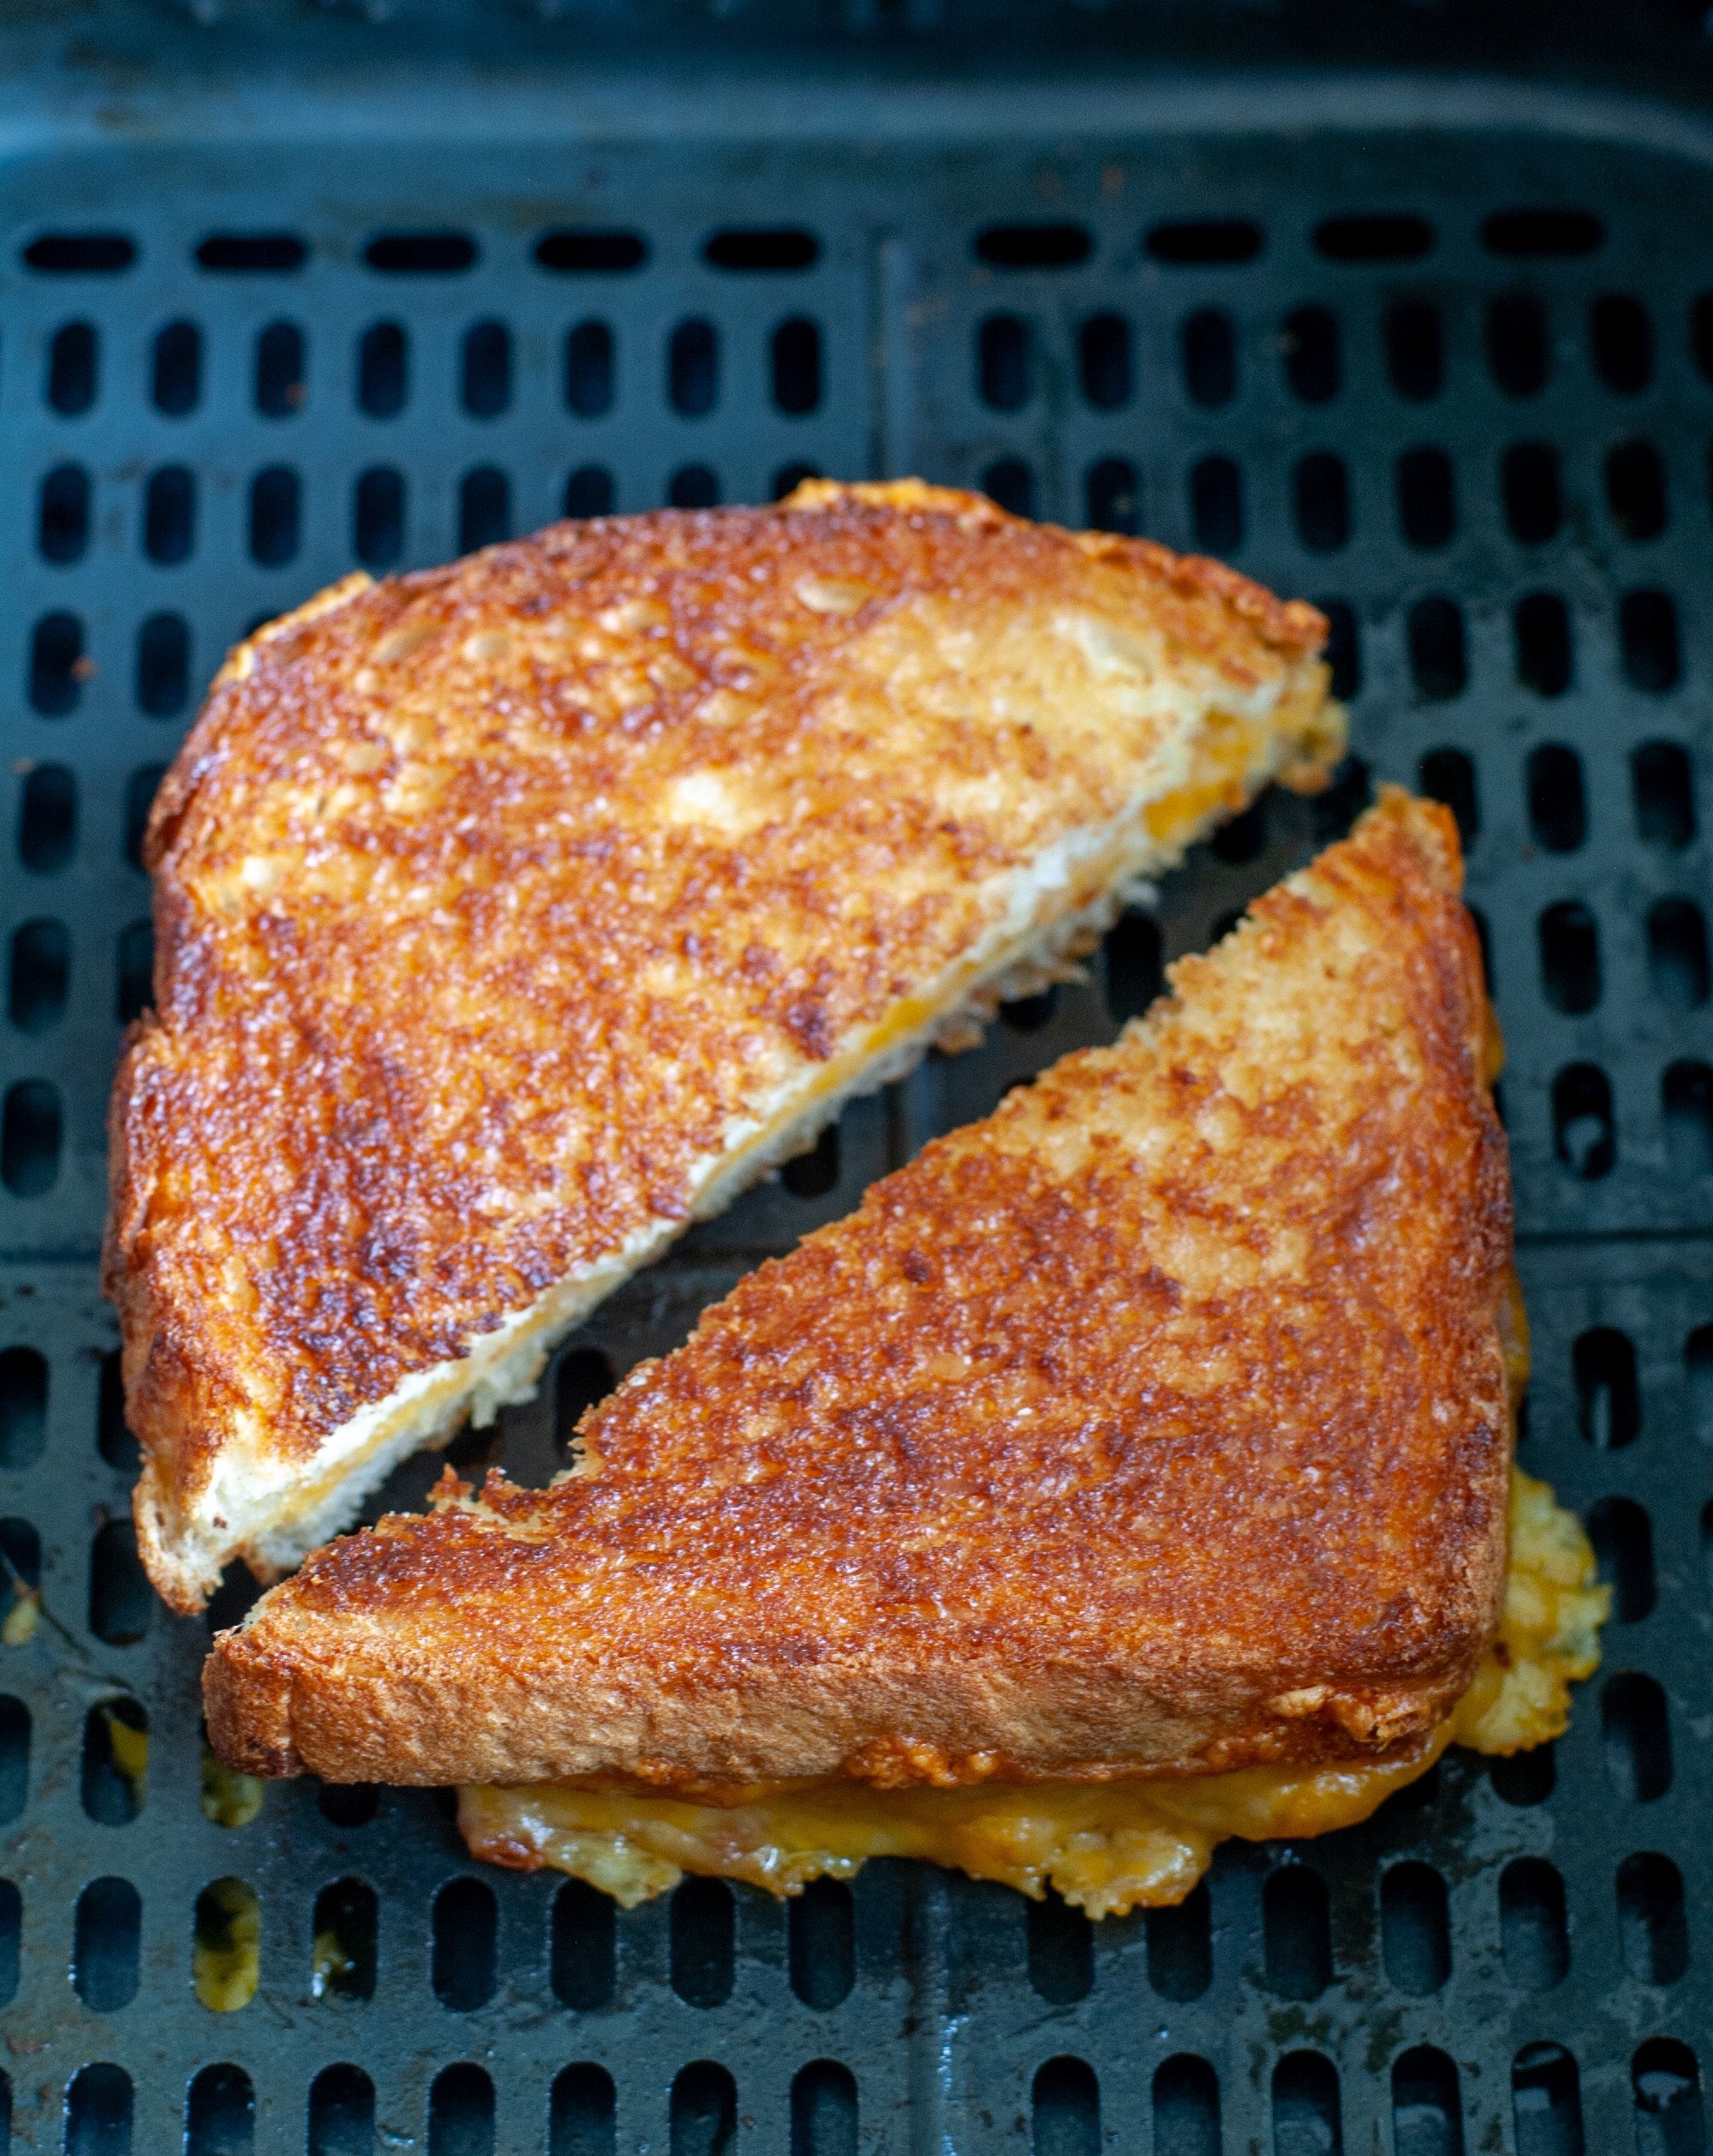 https://www.foodlovinfamily.com/wp-content/uploads/2021/01/grilled-cheese-cut.jpg